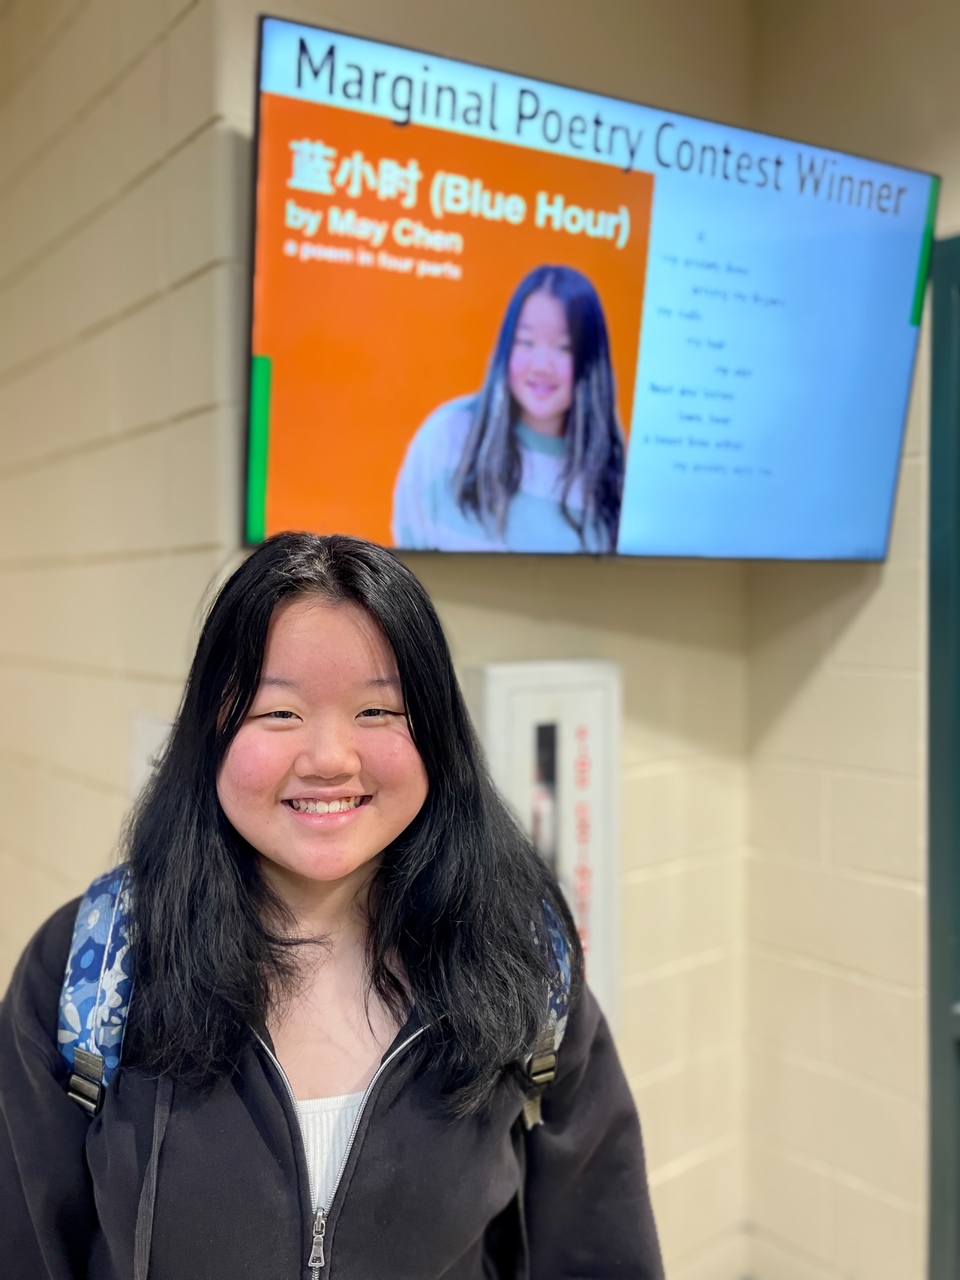 HHS poetry winner Chen finds writing ‘therapeutic’